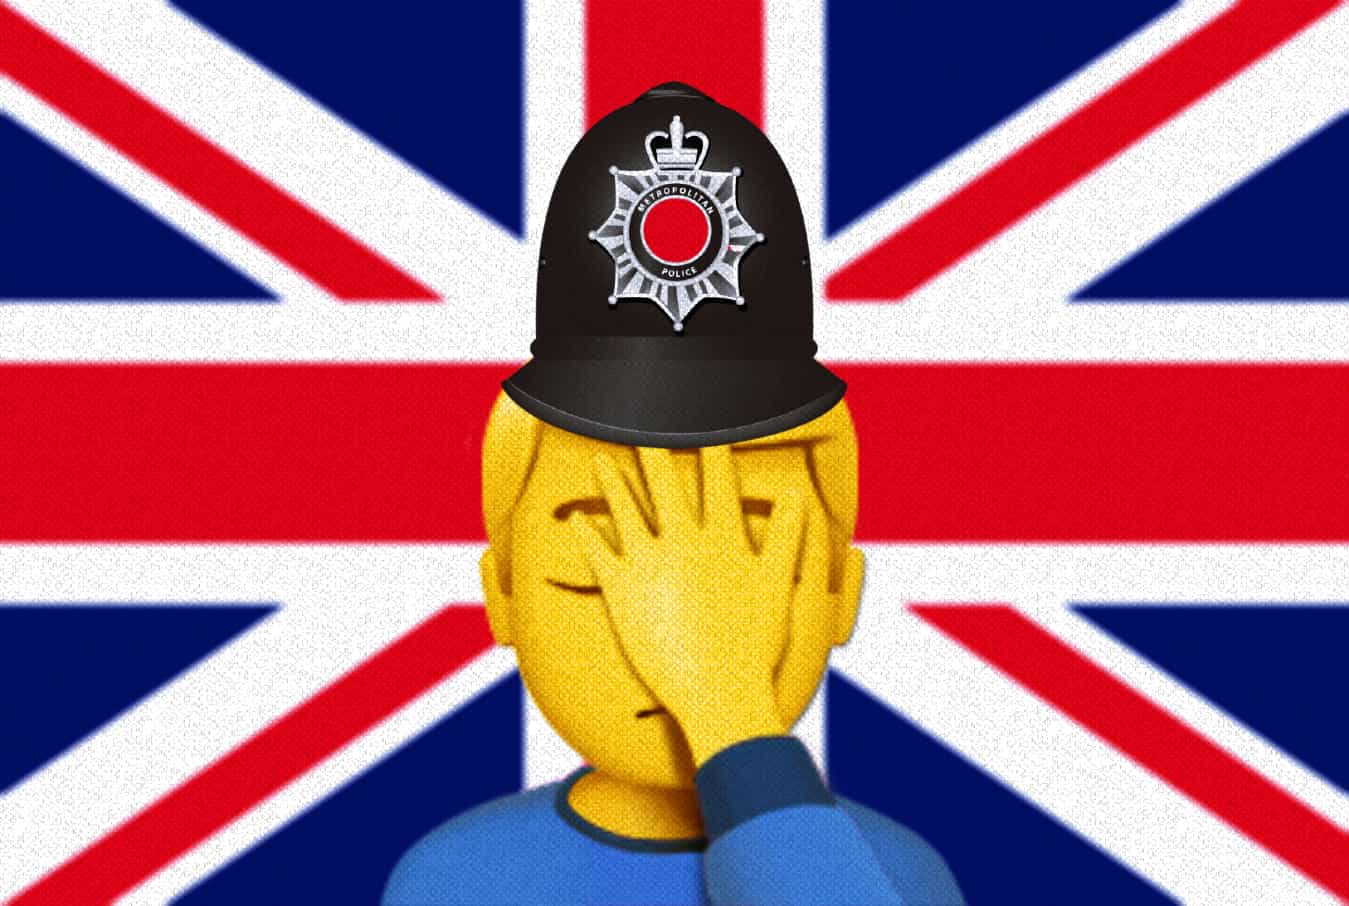 UK Police mistakenly deleted 150,000 arrest records in technical glitch